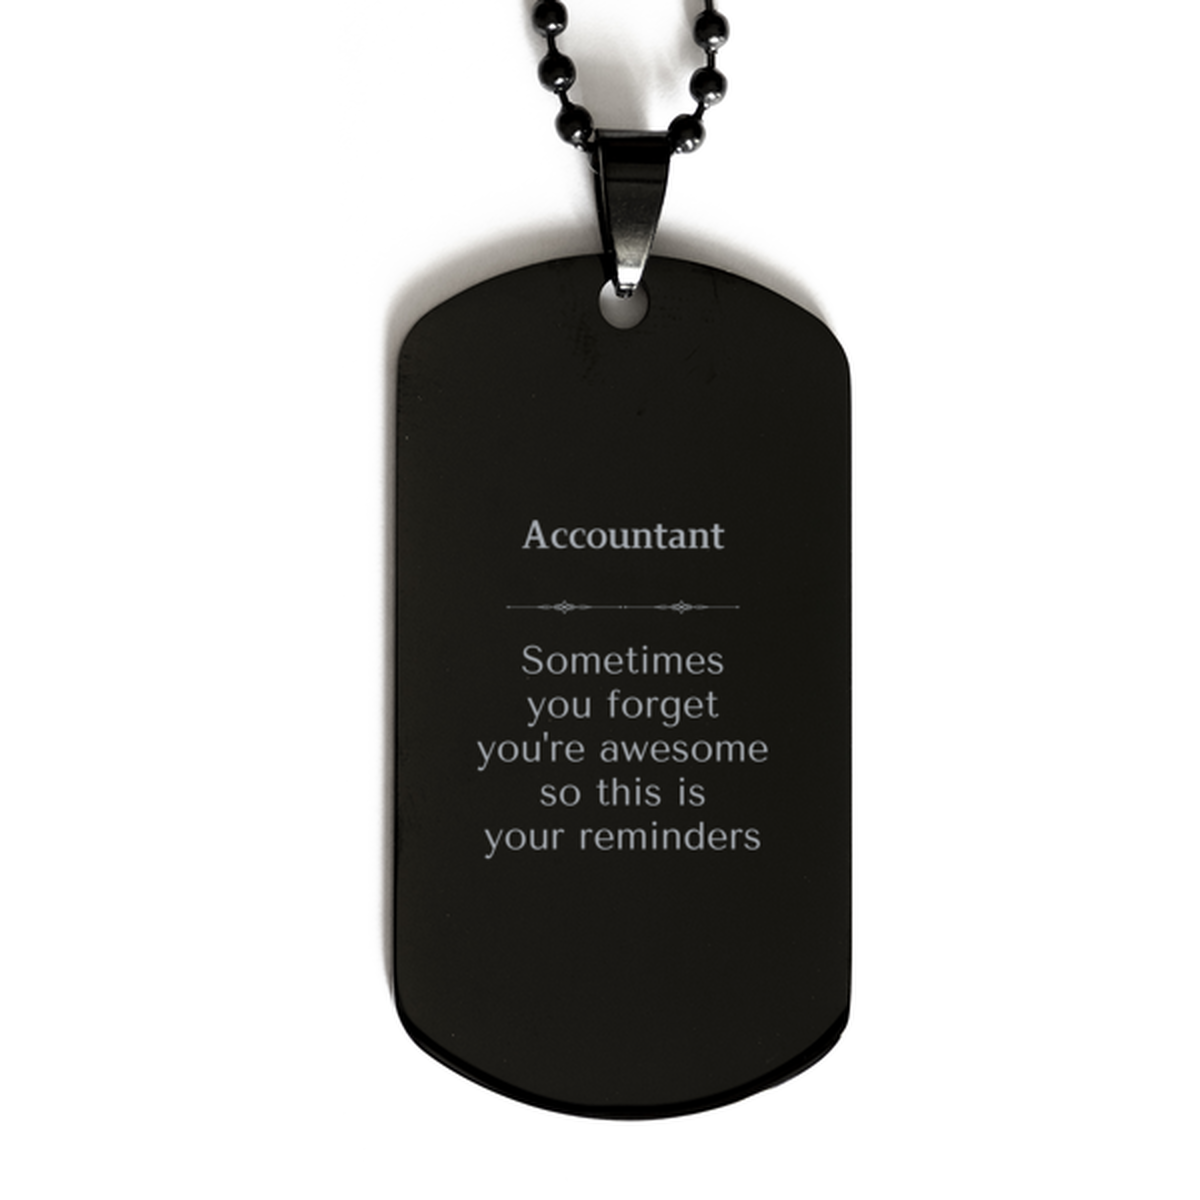 Sentimental Accountant Black Dog Tag, Accountant Sometimes you forget you're awesome so this is your reminders, Graduation Christmas Birthday Gifts for Accountant, Men, Women, Coworkers